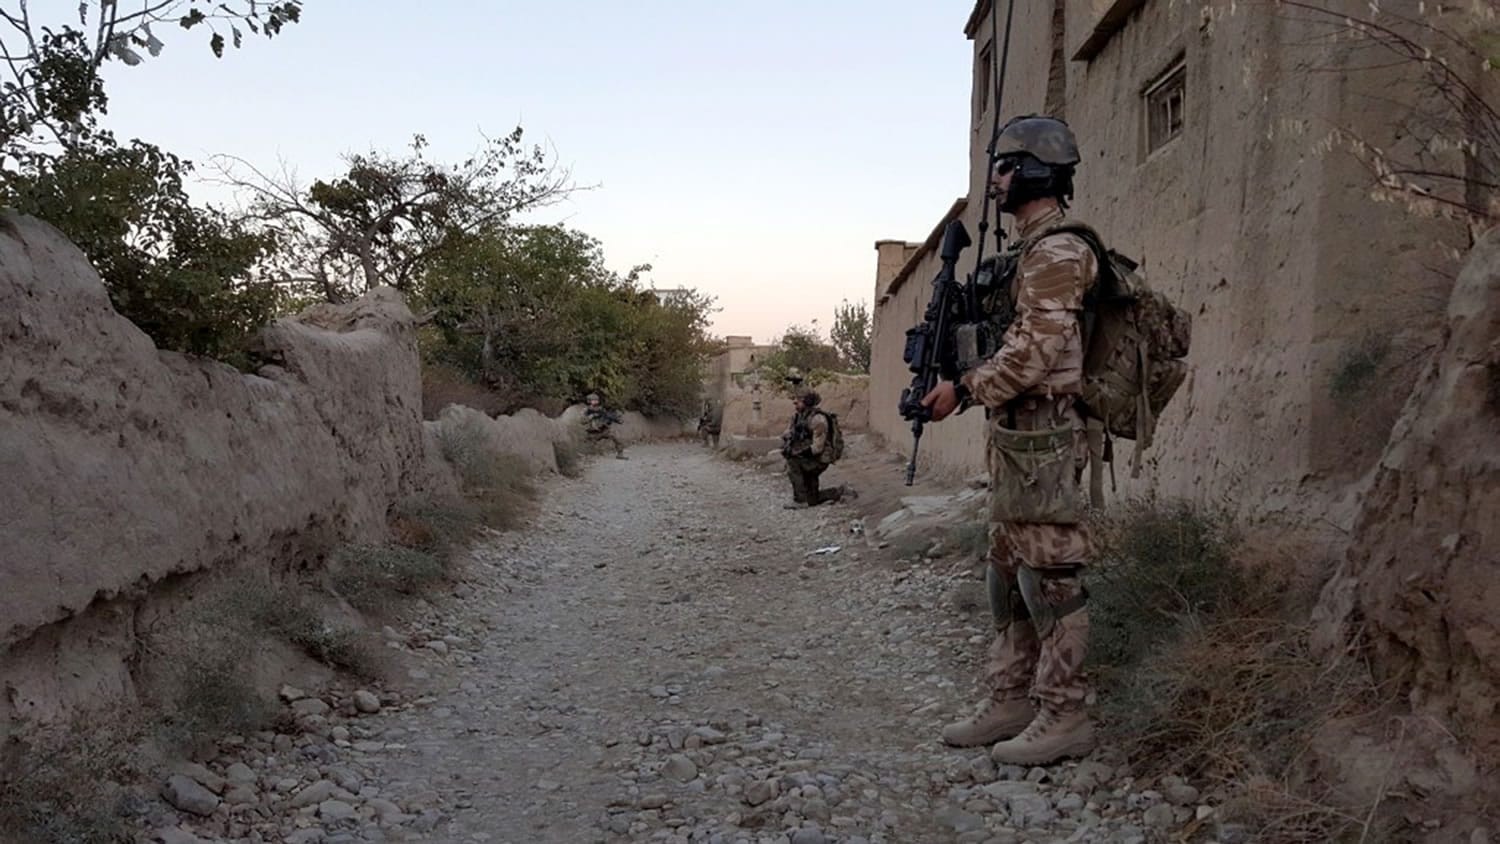 U.S. and Czech soldiers patrol north of Bagram Airfield in Afghanistan on Oct. 20 looking for signs of Taliban fighters.